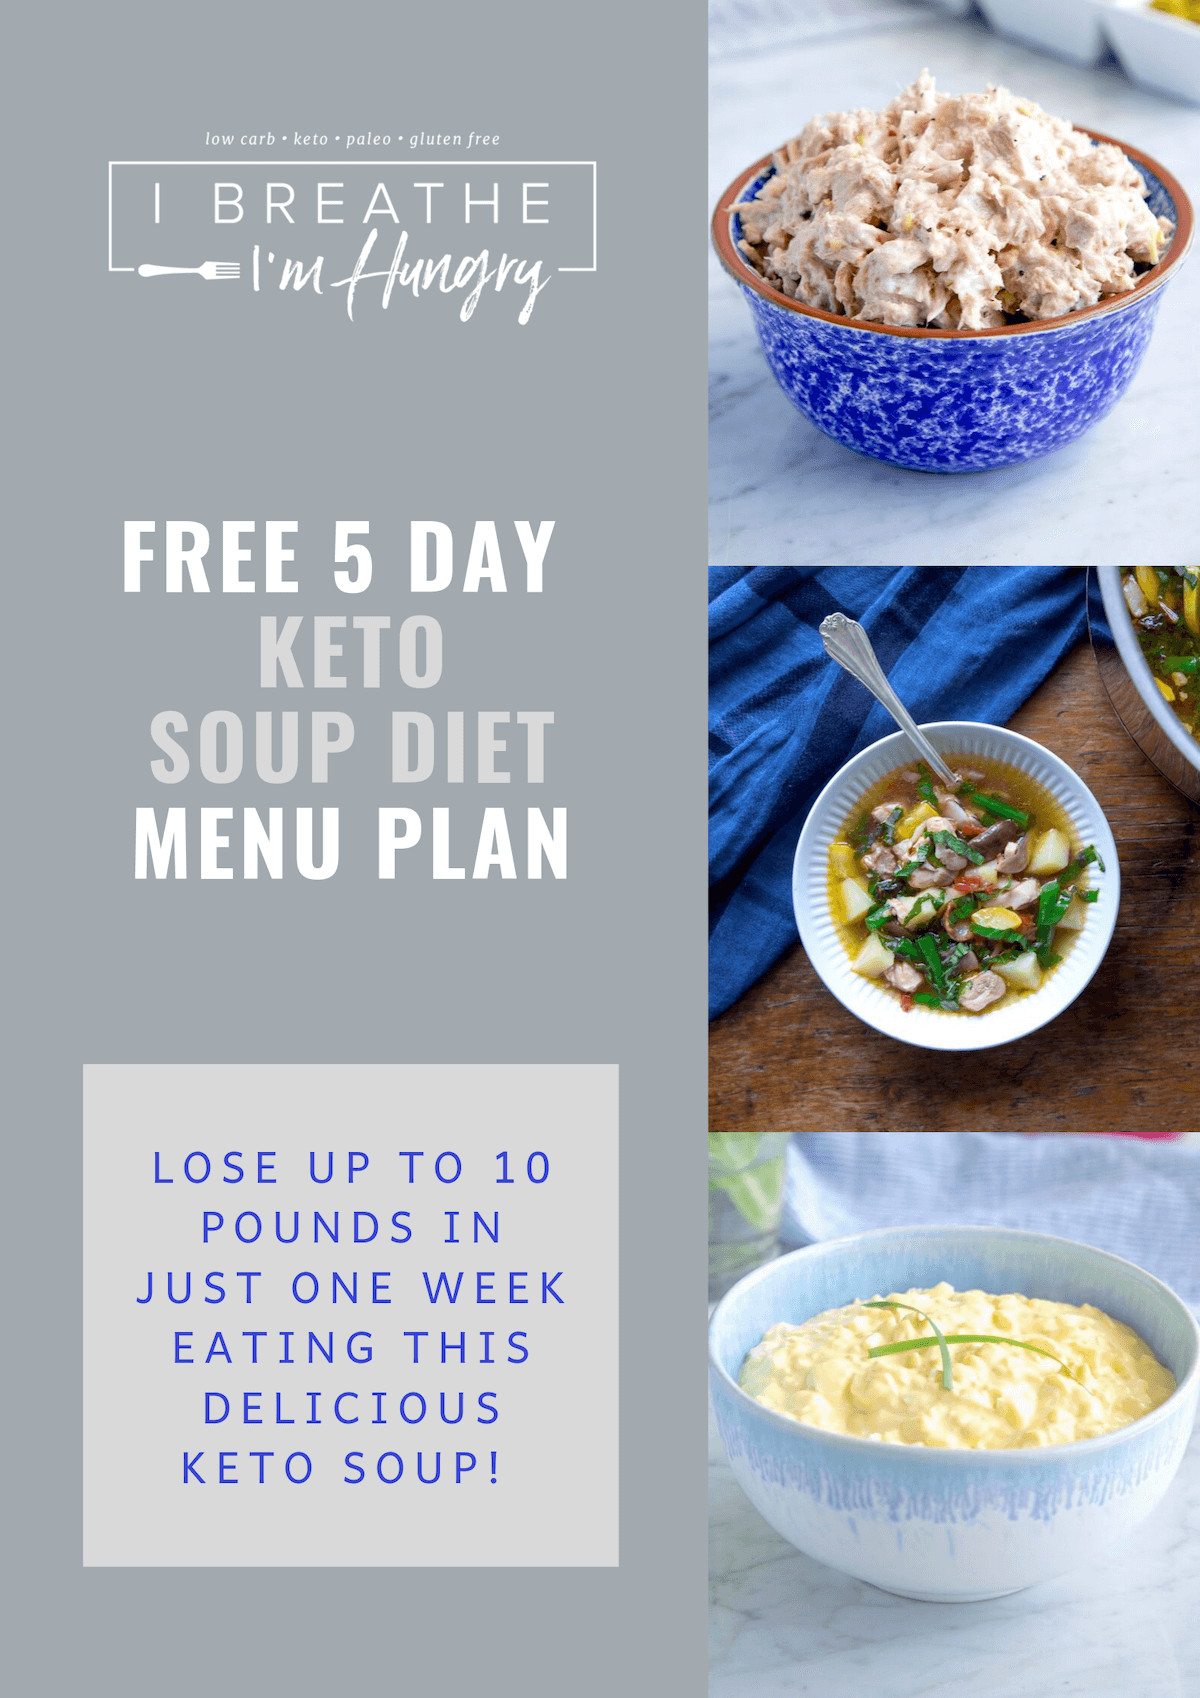 5 Day Keto soup Diet New Ibih 5 Day Keto soup Diet Low Carb whole30 Sckc